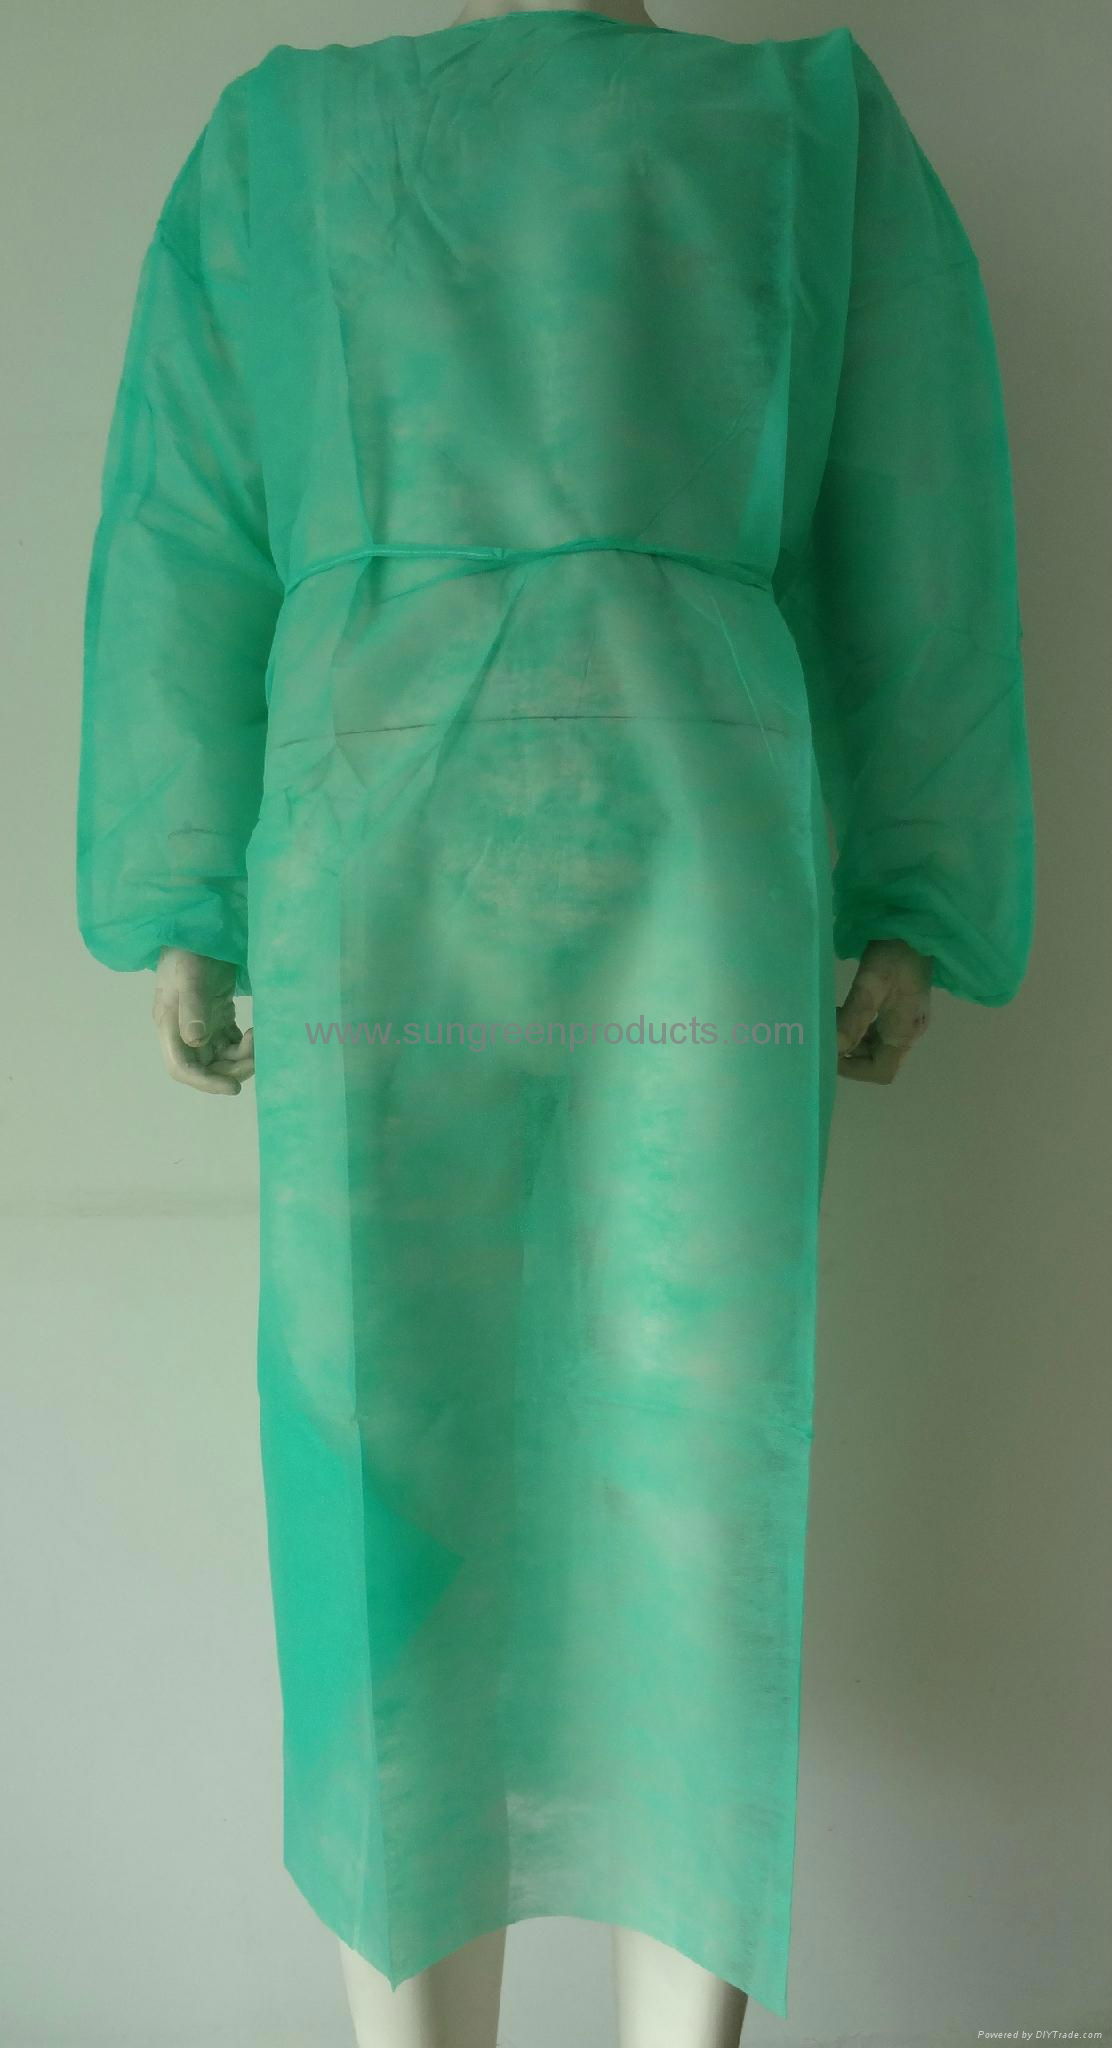 Nonwoven surgical gown,isolation gown 4